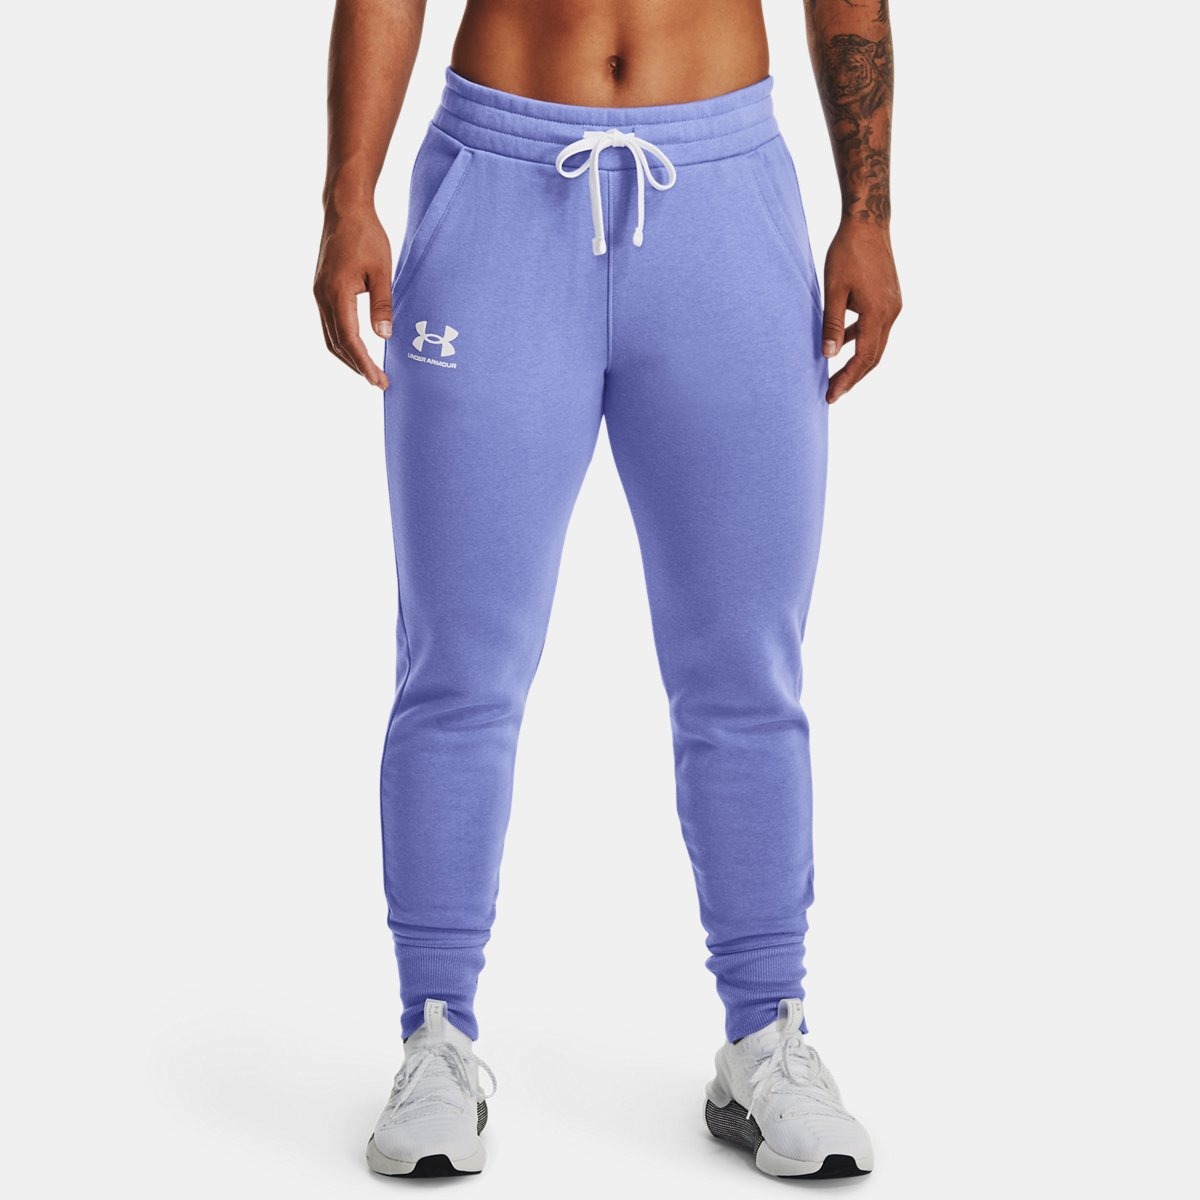 Women's Joggers in Blue at Under Armour GOOFASH